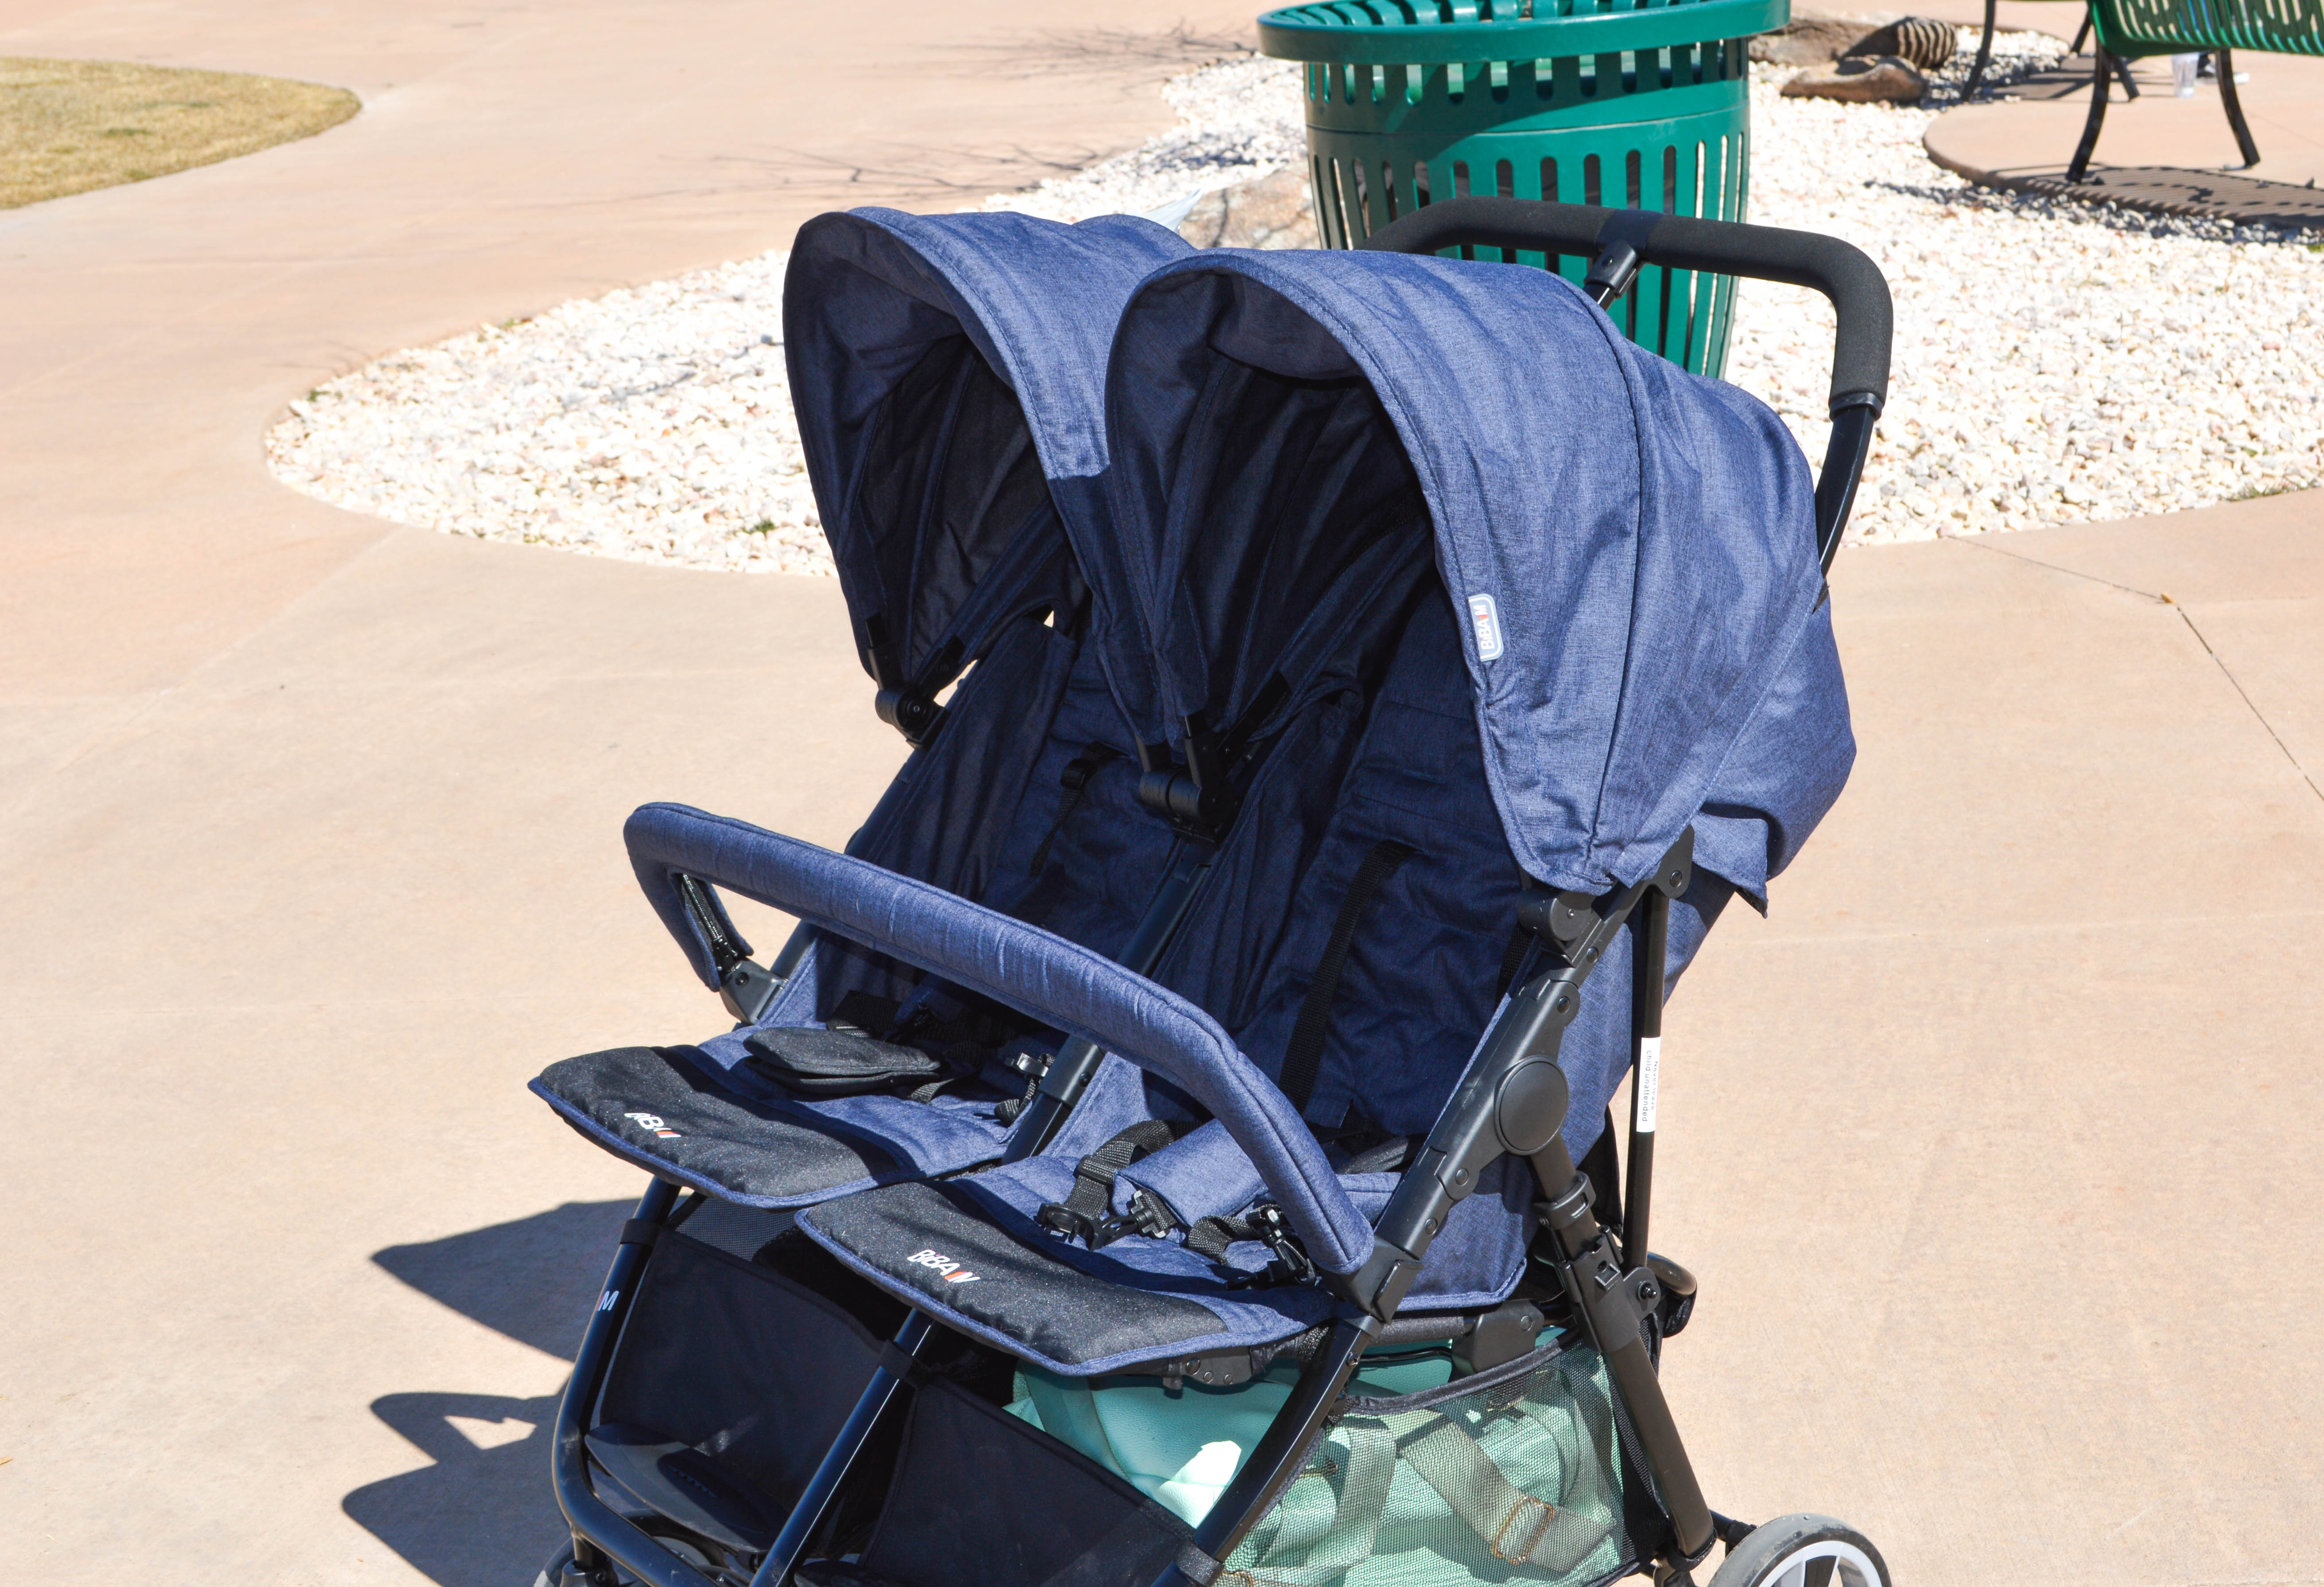 Biba M Double Stroller Review featured by popular Denver life and style blogger, All Things Lovely